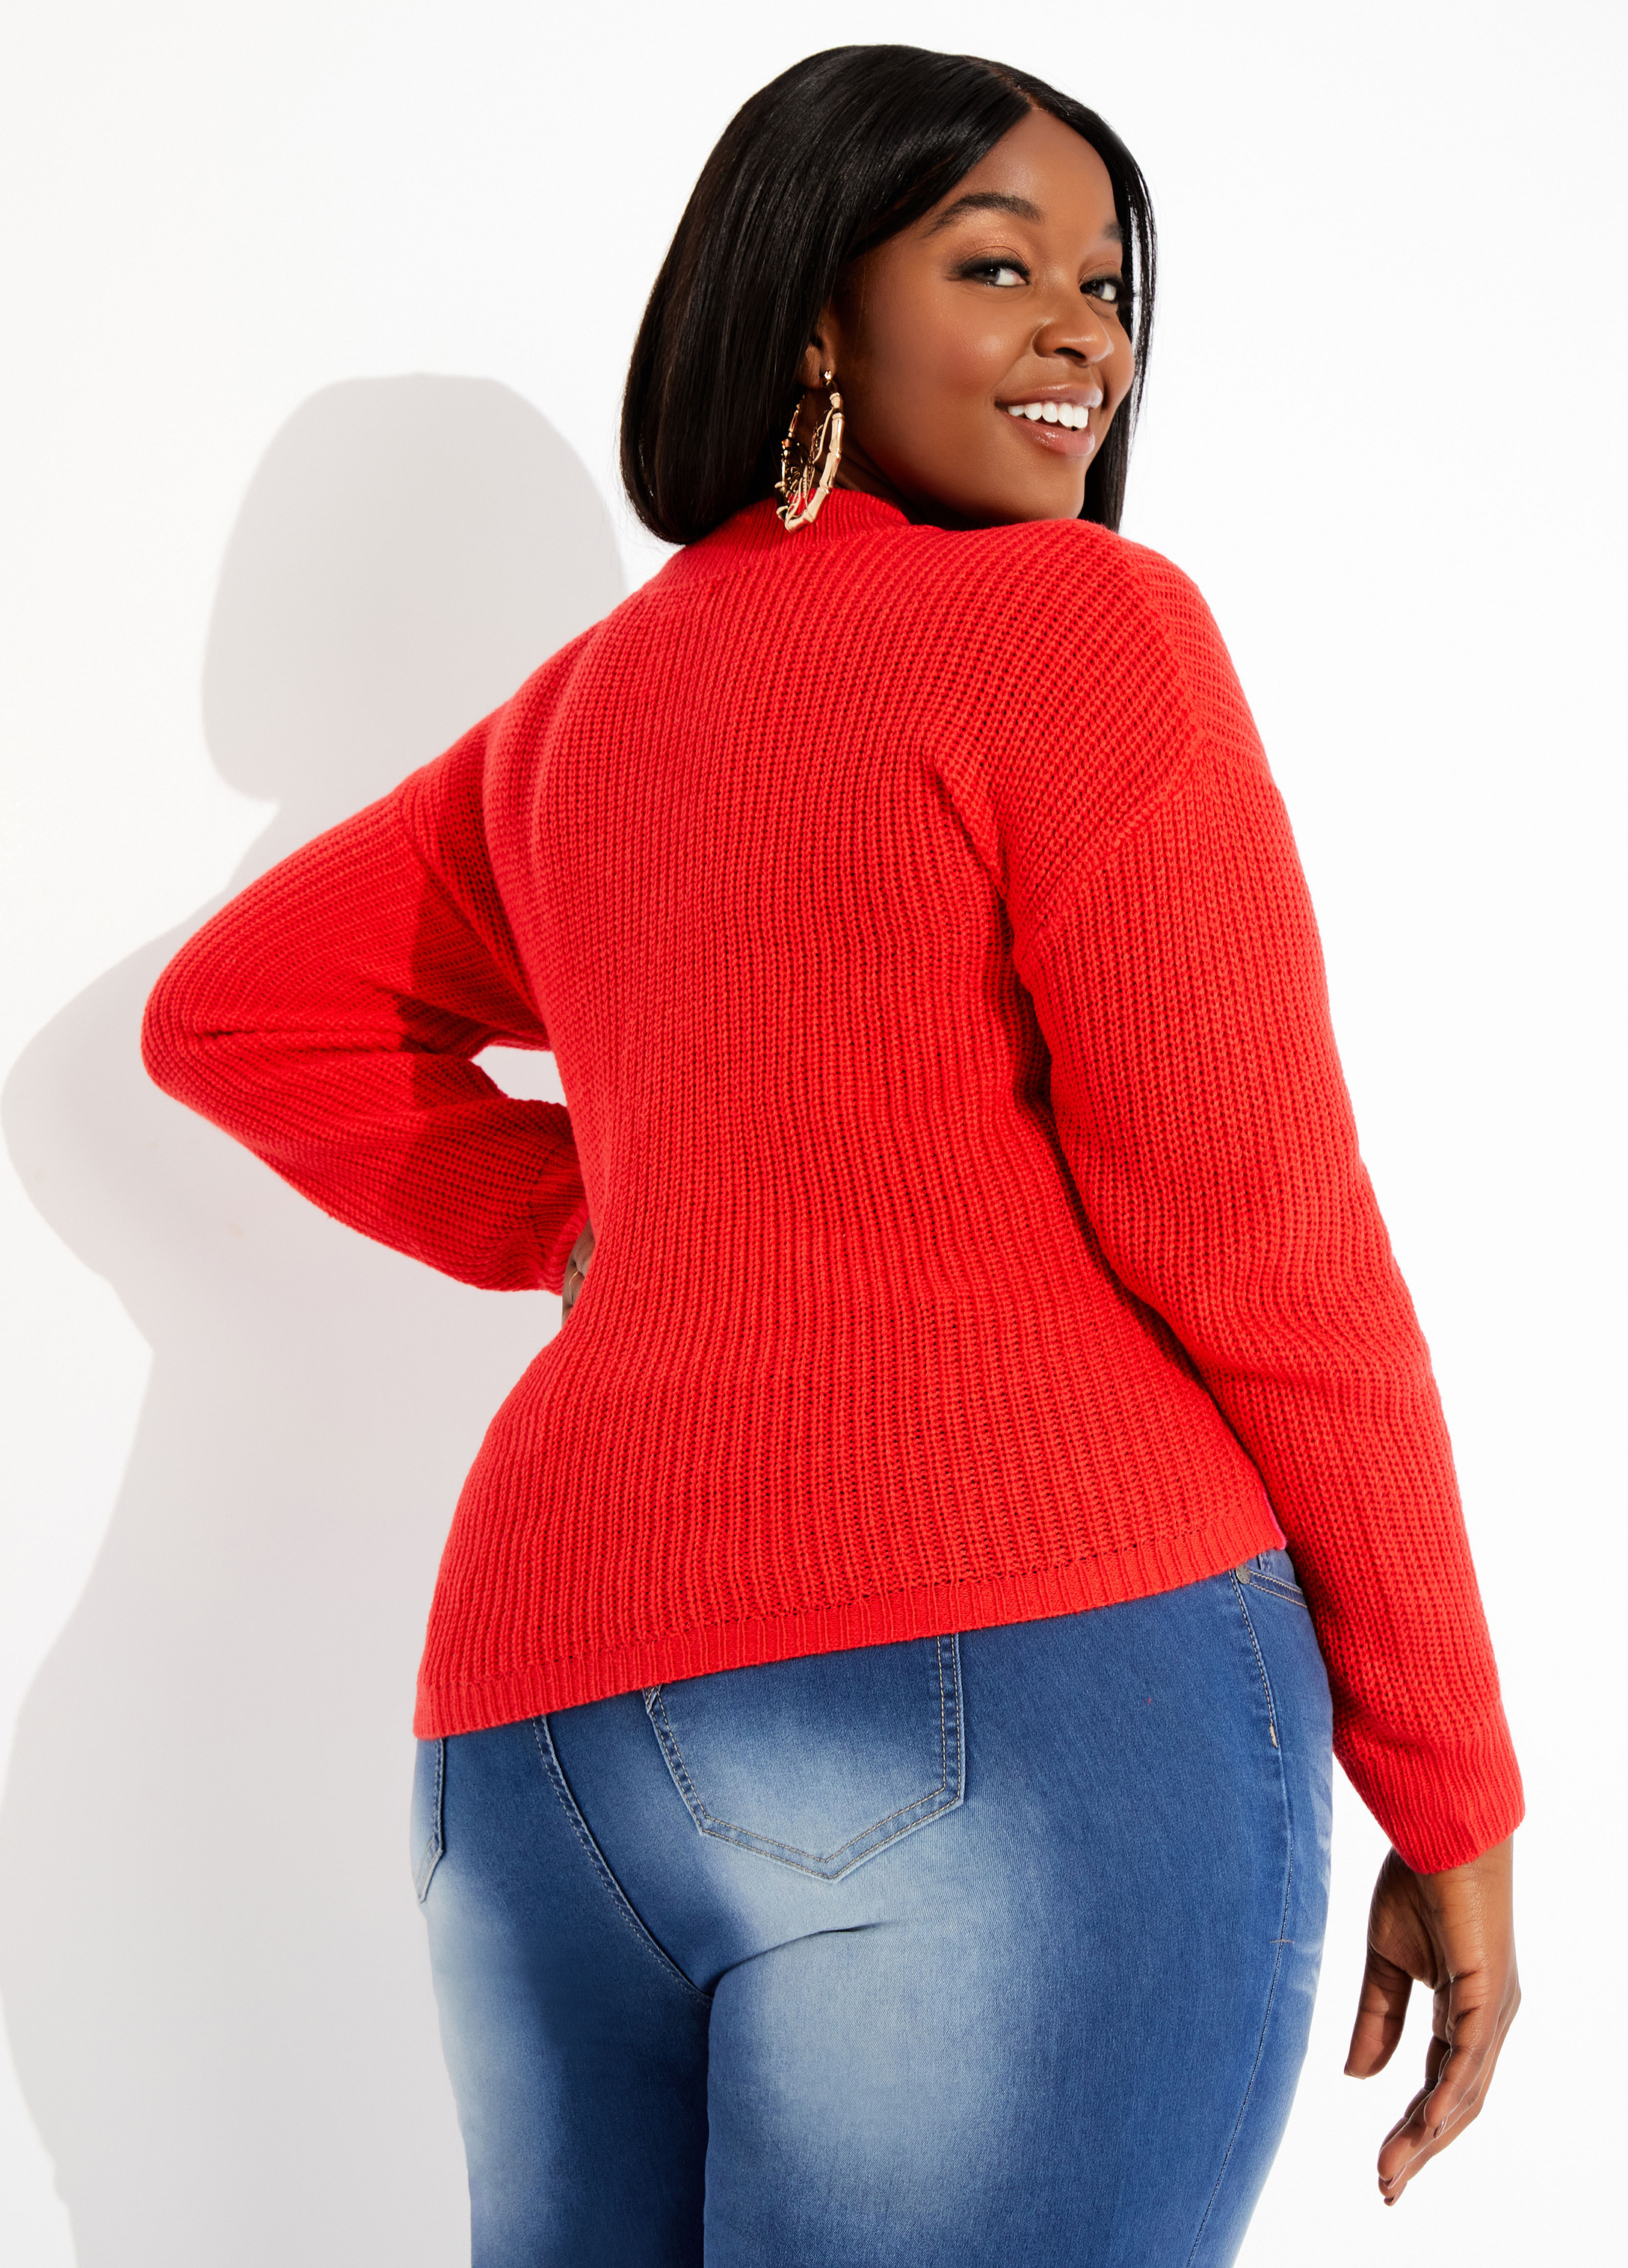 1357 - The Blakely Sweater - Plus Size Trendy Sweater – Tiffany